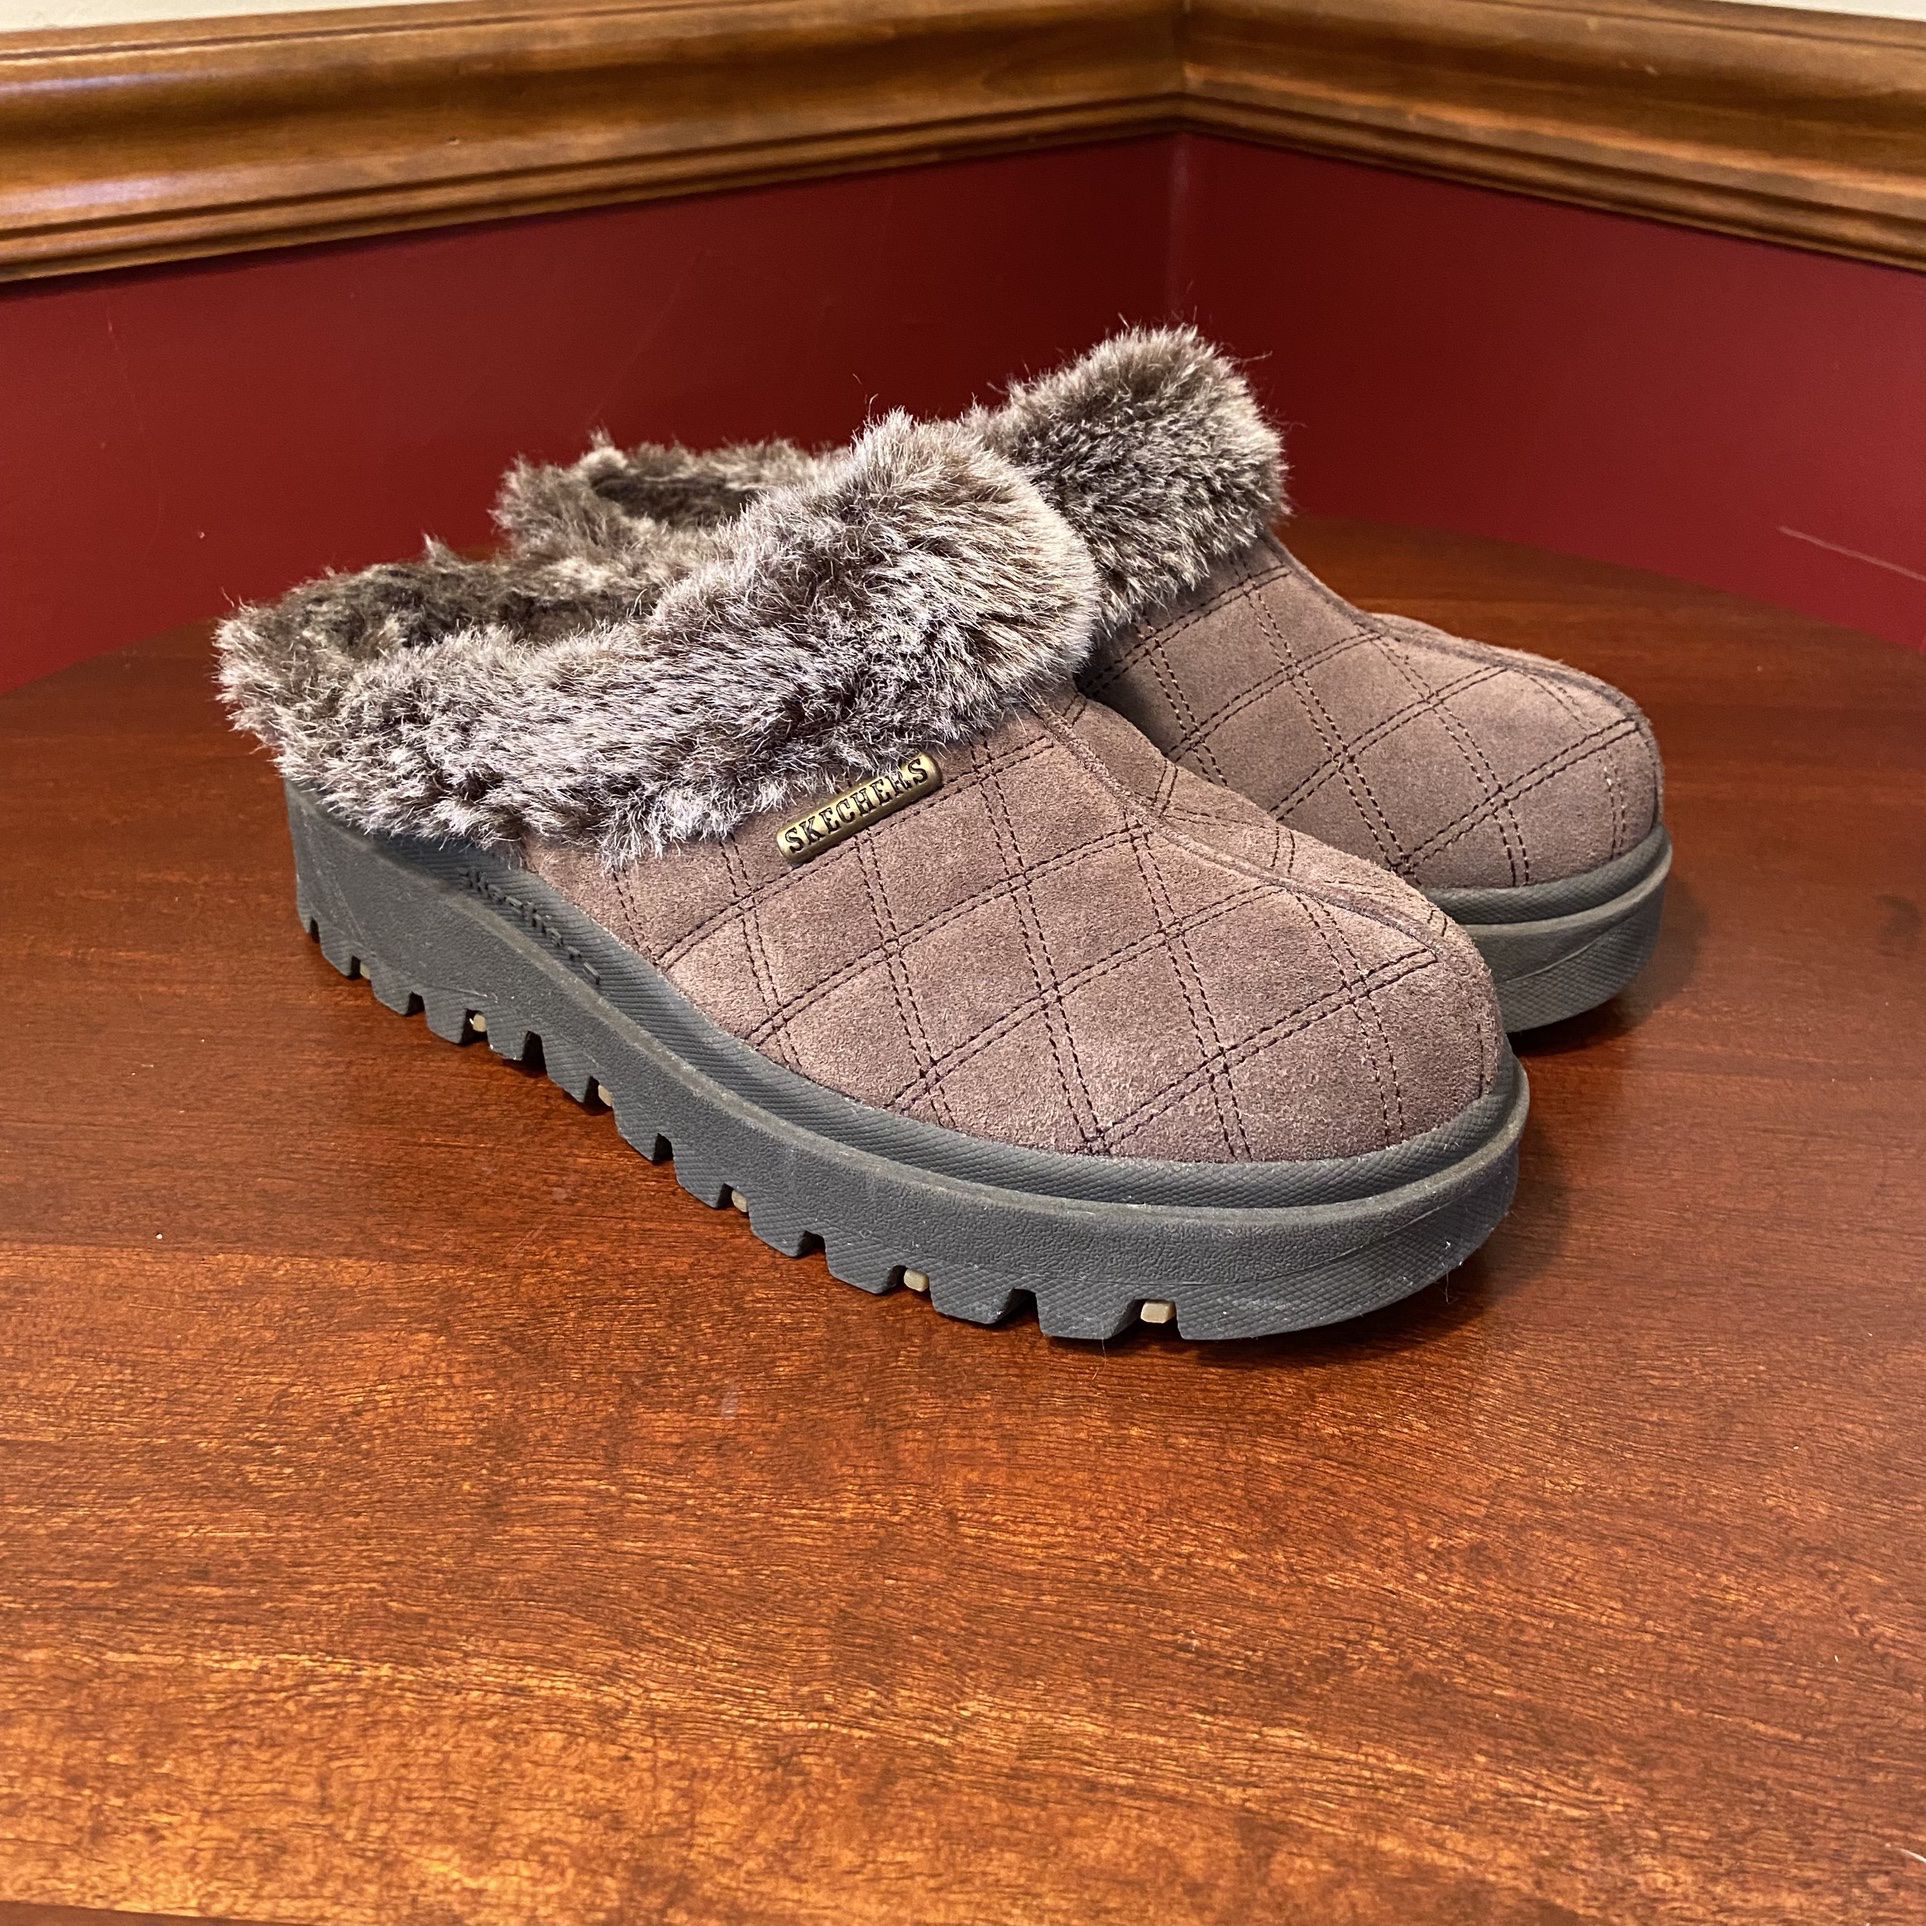 Skechers Shindigs Miracle Suede Clogs Faux Fur Lining Womens 8 Sale in Coplay, PA - OfferUp